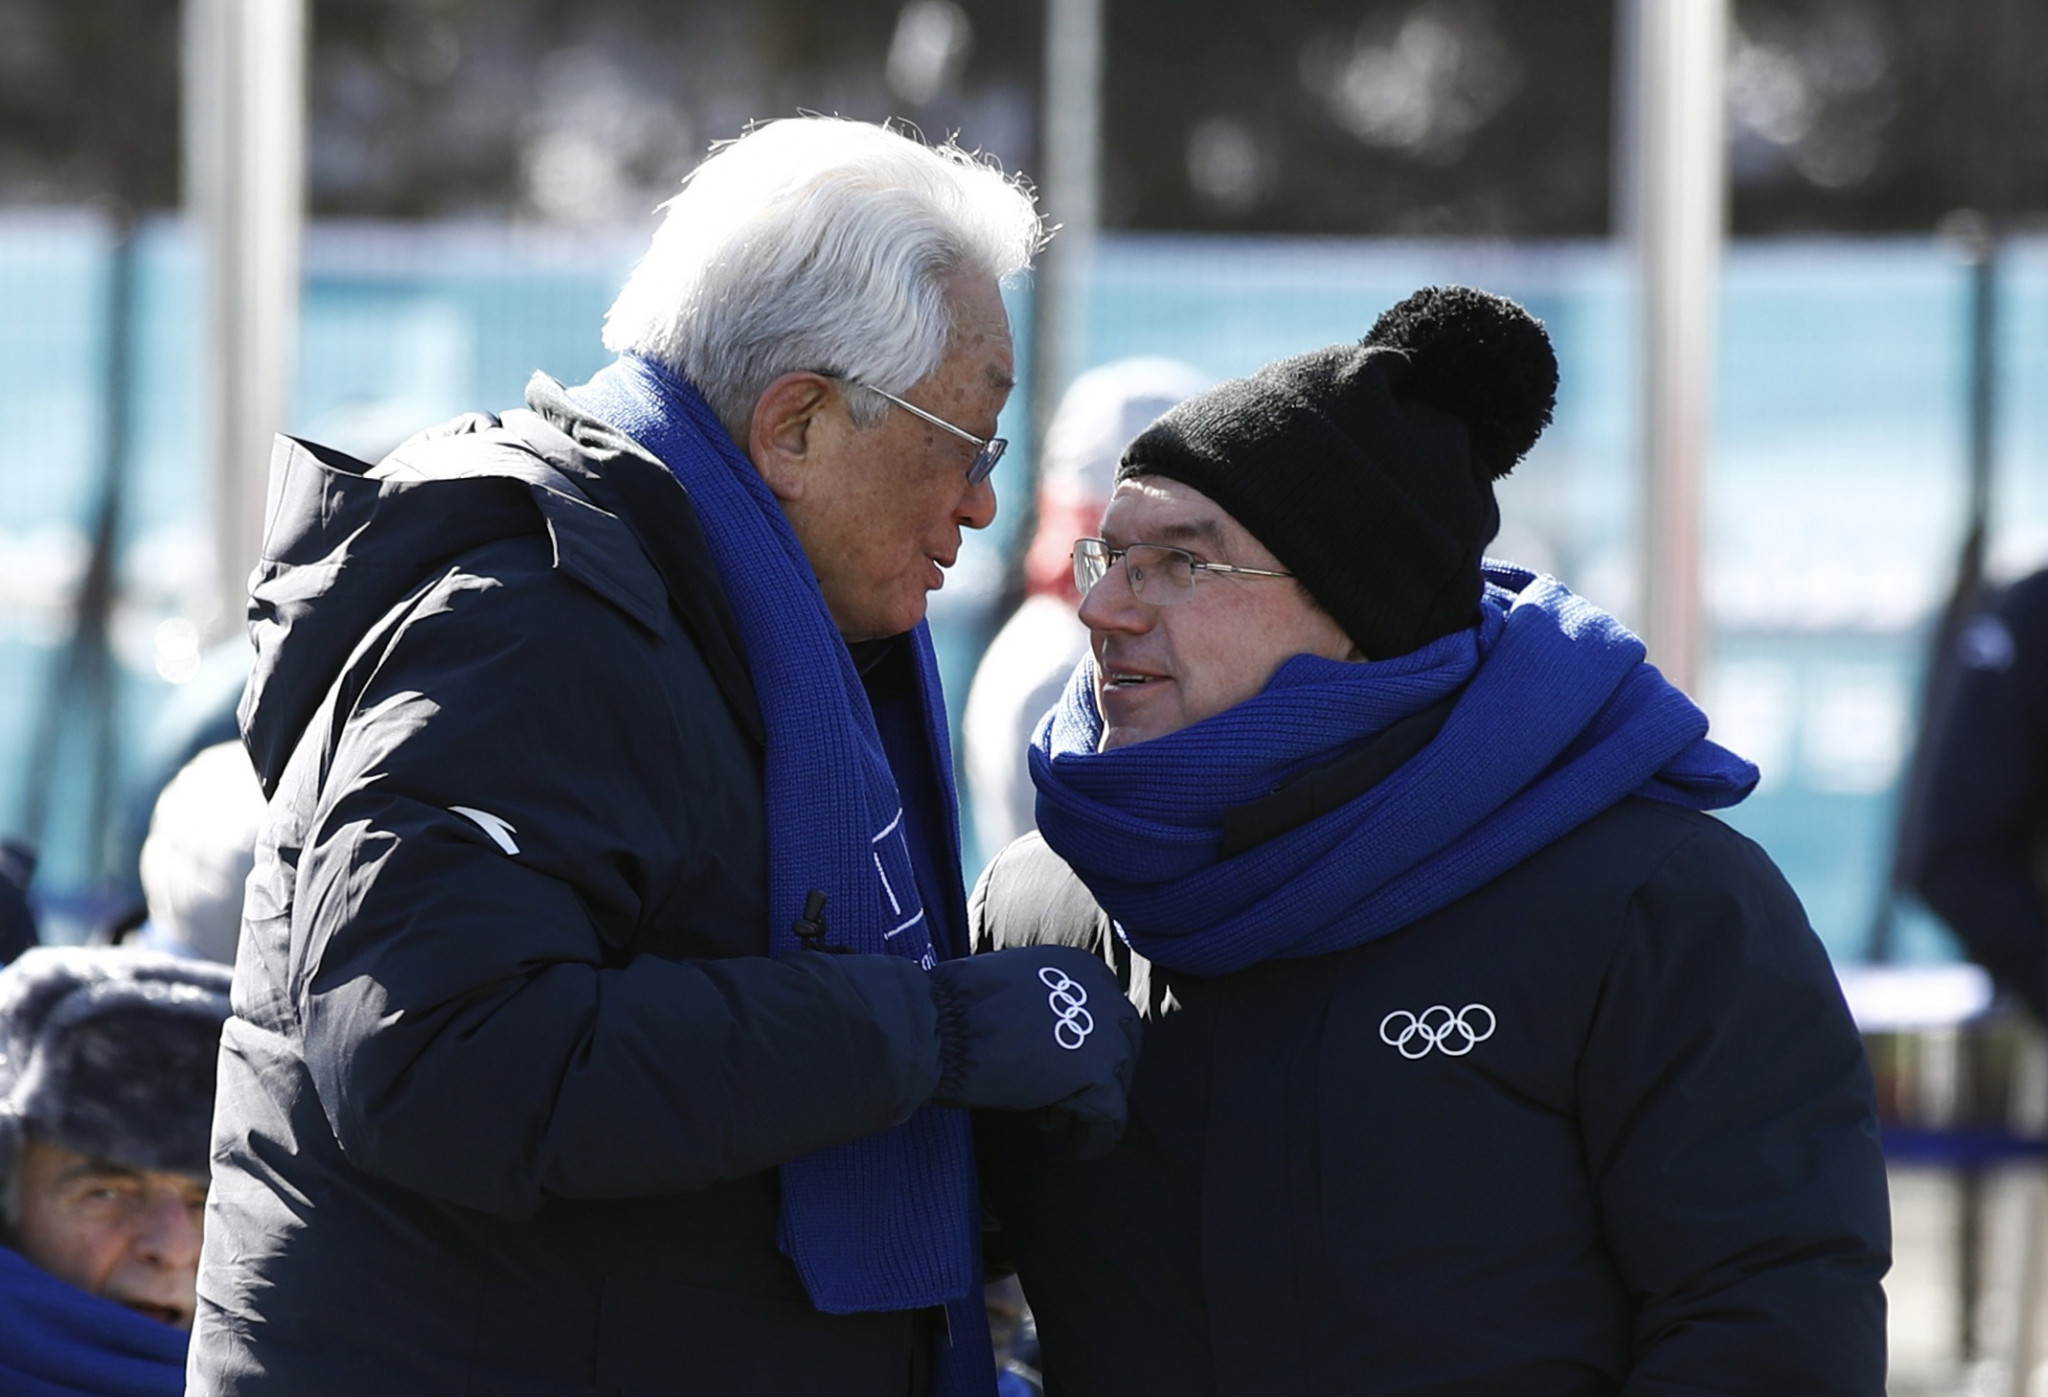 Chang Ung, left, pictured with IOC President Thomas Bach at Pyeongchang 2018 ©Getty Images